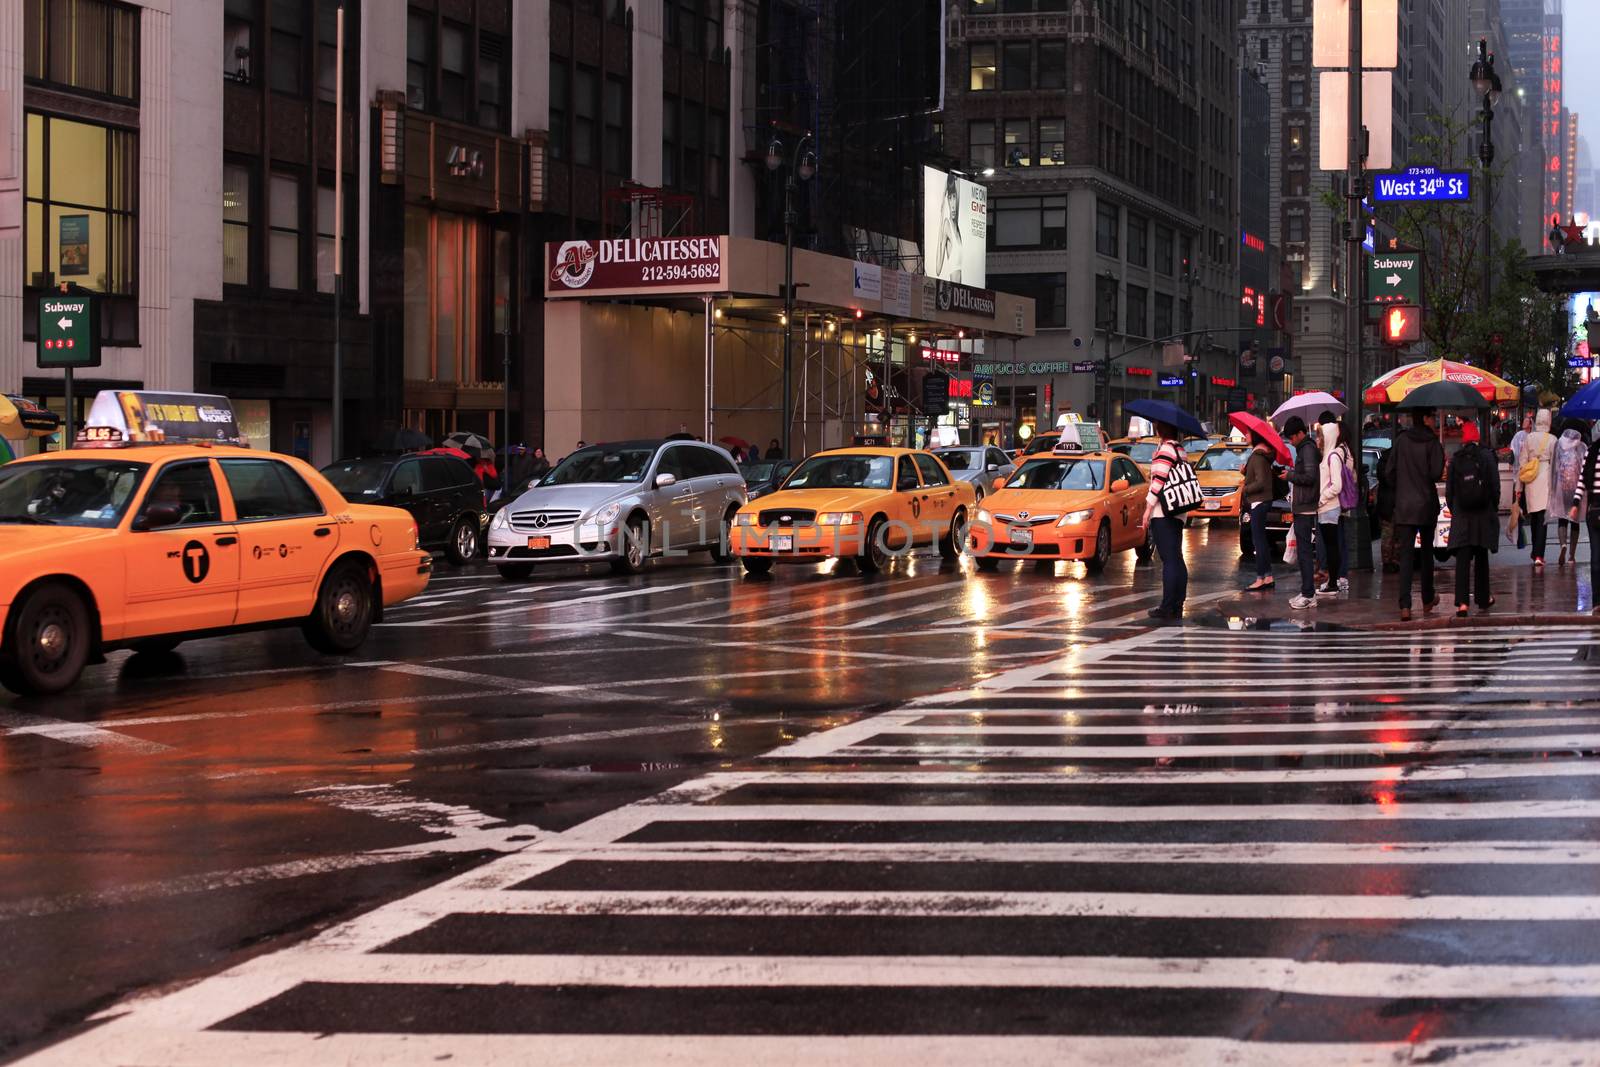 New York, USA - May 20, 2013: taxi's crossing at Time Square at night in the rain. The site is regarded as the world's most visited tourist attraction with nearly 40 million visitors annually.